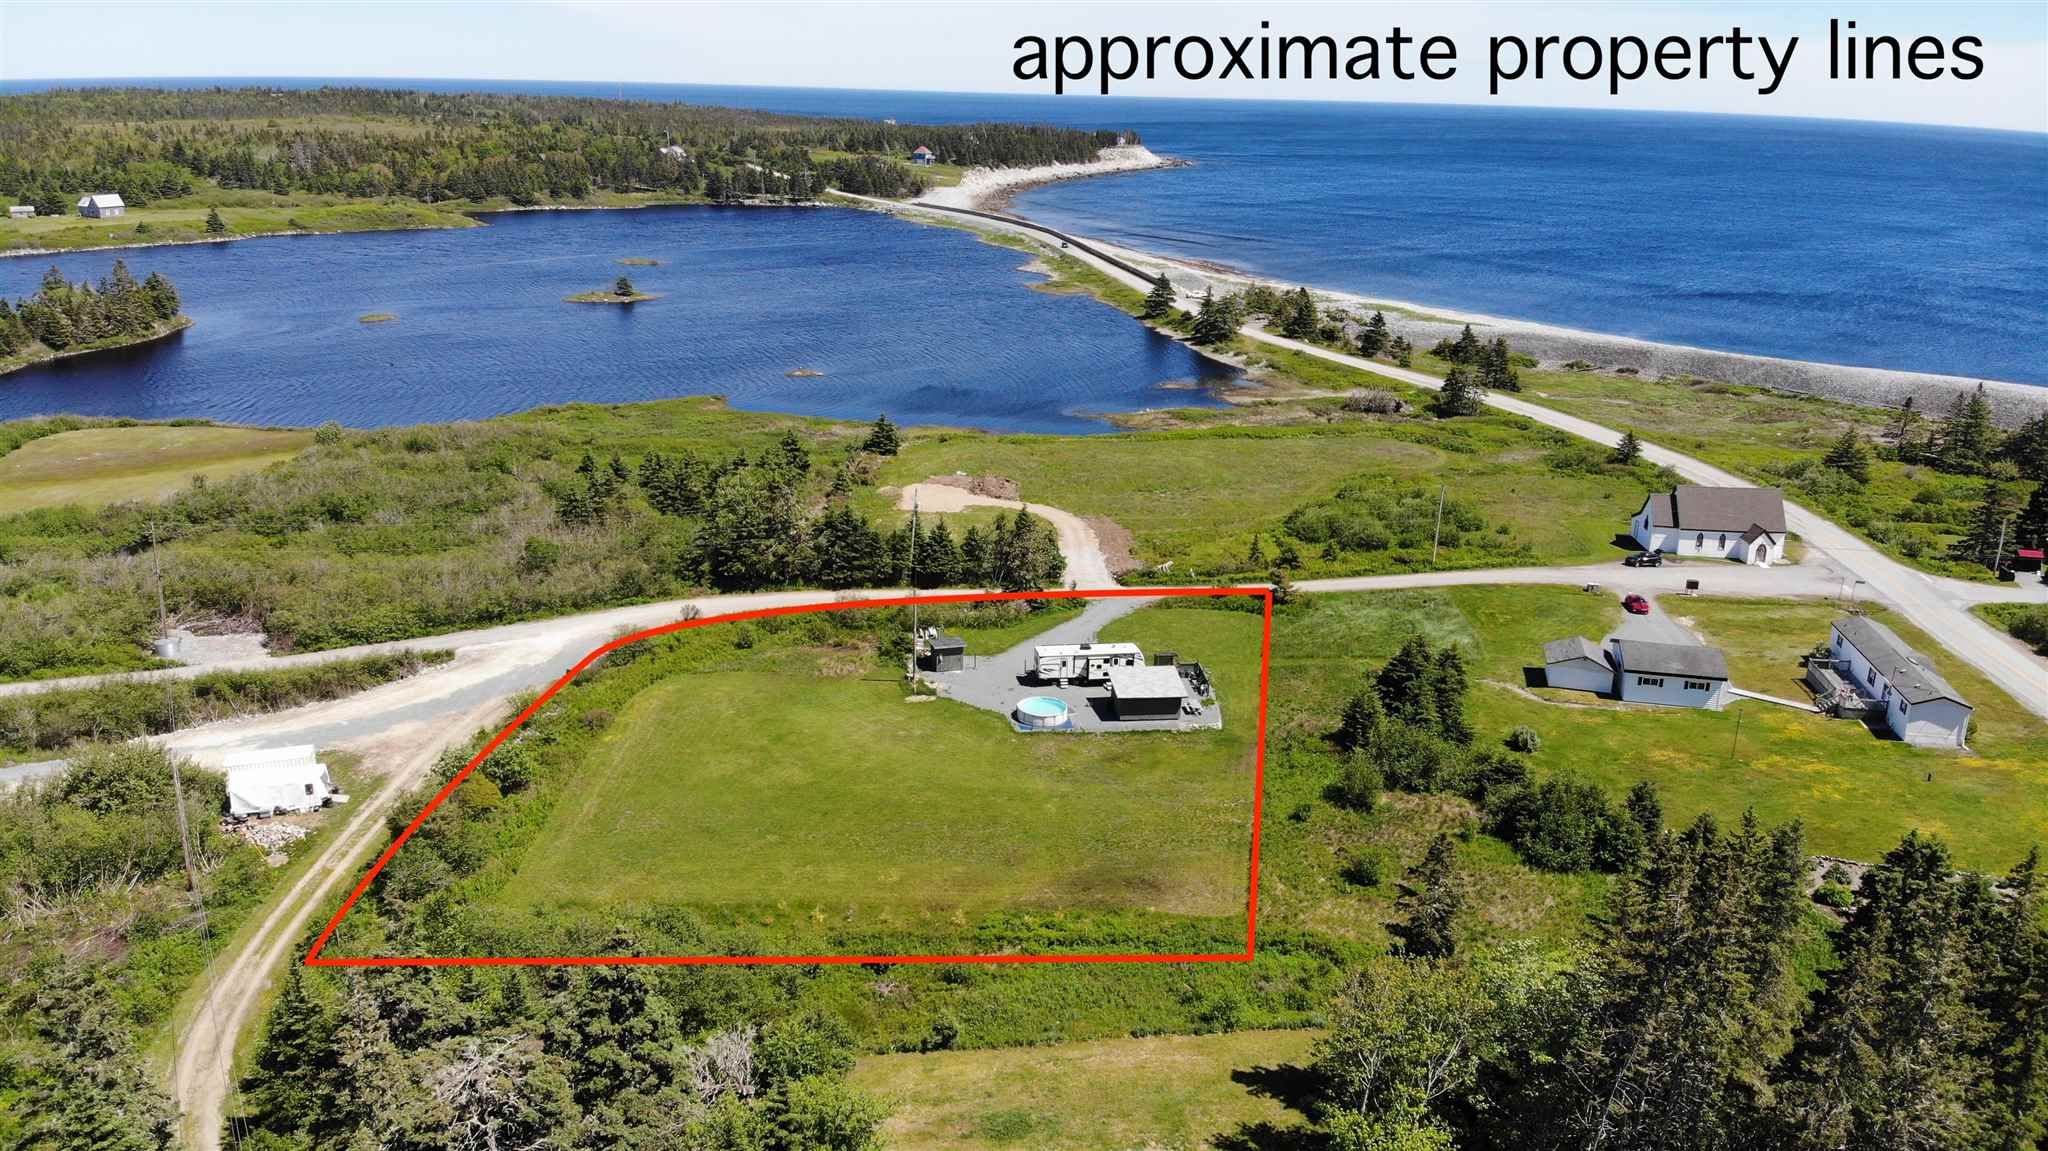 Main Photo: 17 Mosher Road in Western Head: 406-Queens County Vacant Land for sale (South Shore)  : MLS®# 202113513